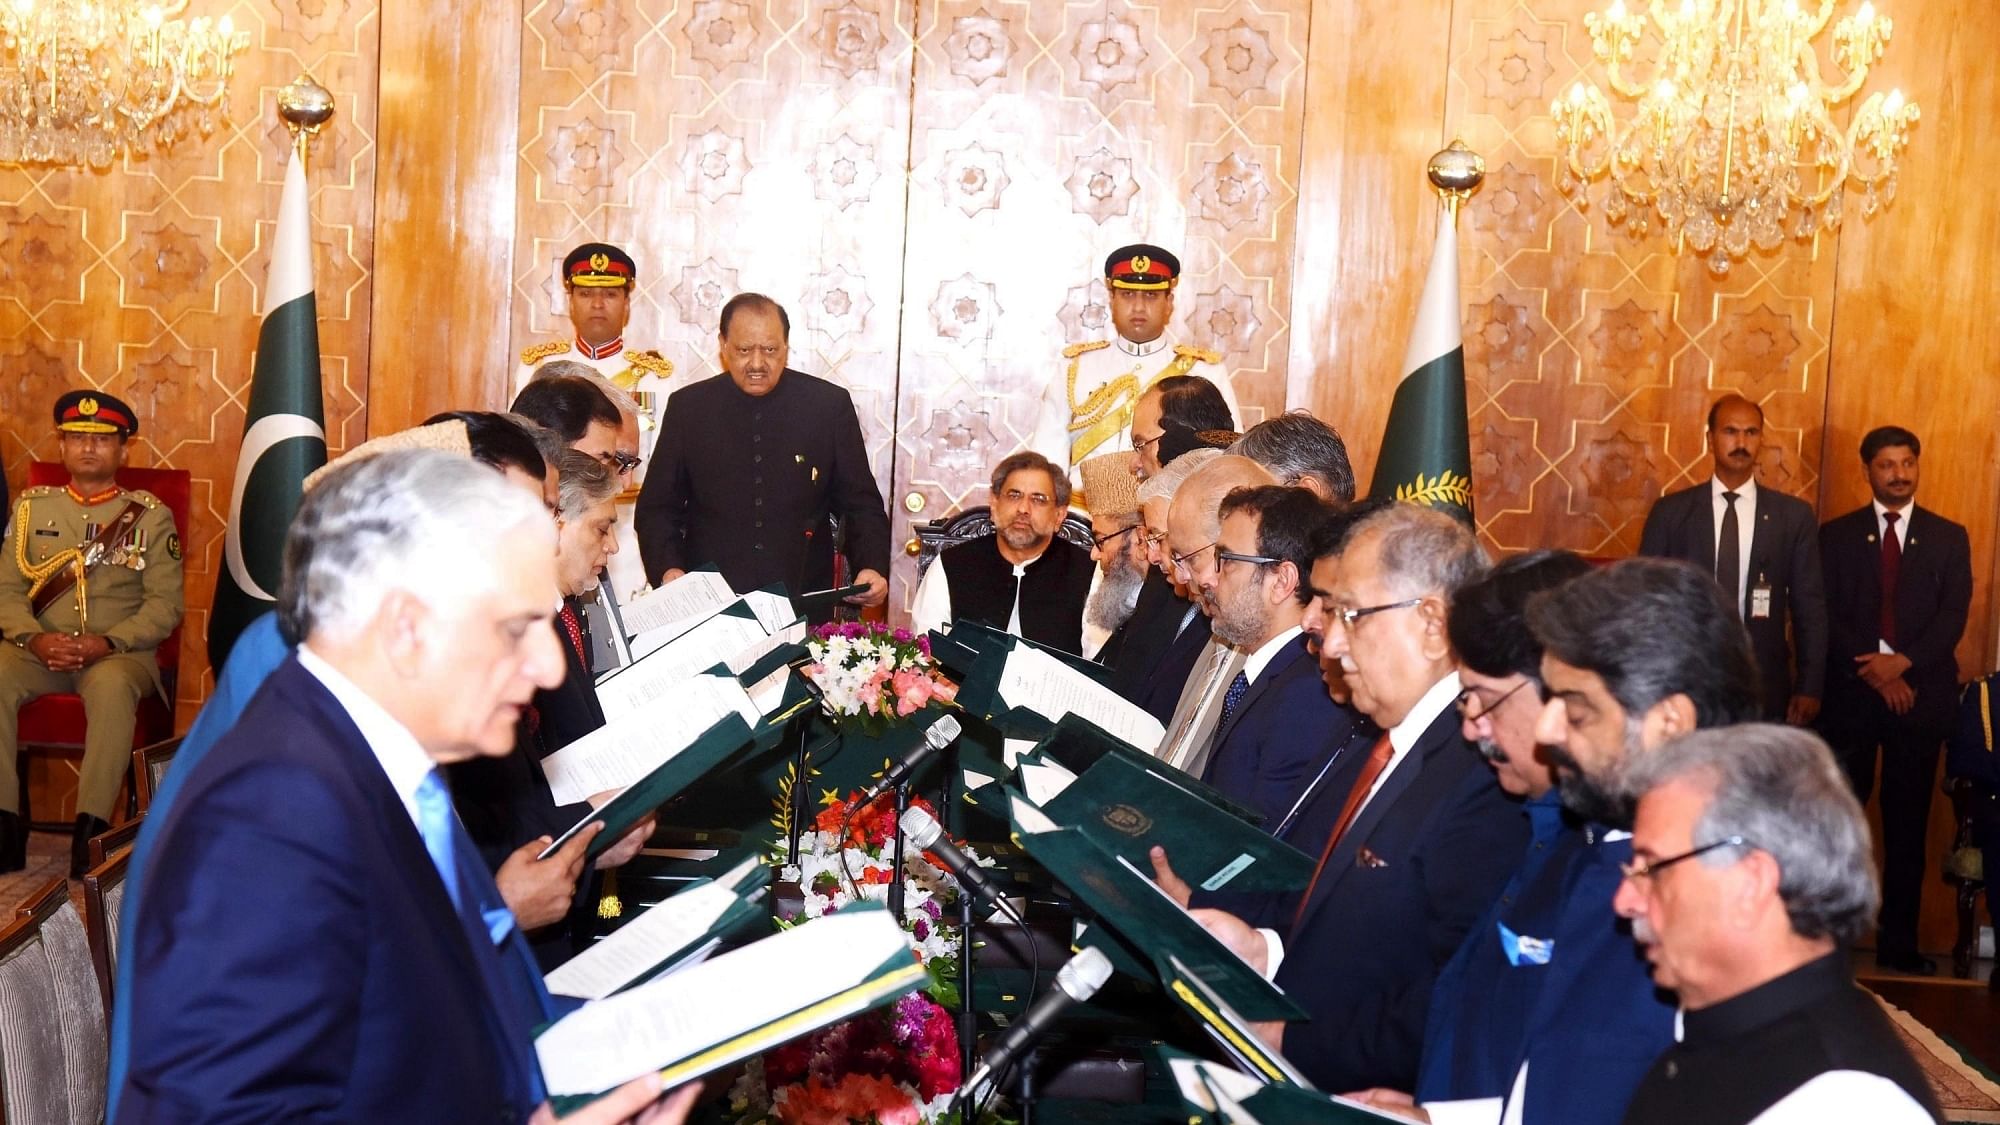 Photo released by Pakistan’s Press Information Department (PID) on Aug. 4, 2017 shows federal ministers of Pakistan’s new cabinet being sworn in by Pakistani President Mamnoon Hussain during a sworn-in ceremony at President House in Islamabad, capital of Pakistan. Pakistan’s new cabinet of Prime Minister Shahid Khaqan Abbasi was sworn in at an oath-taking ceremony at the Presidency in Islamabad on Friday.&nbsp;